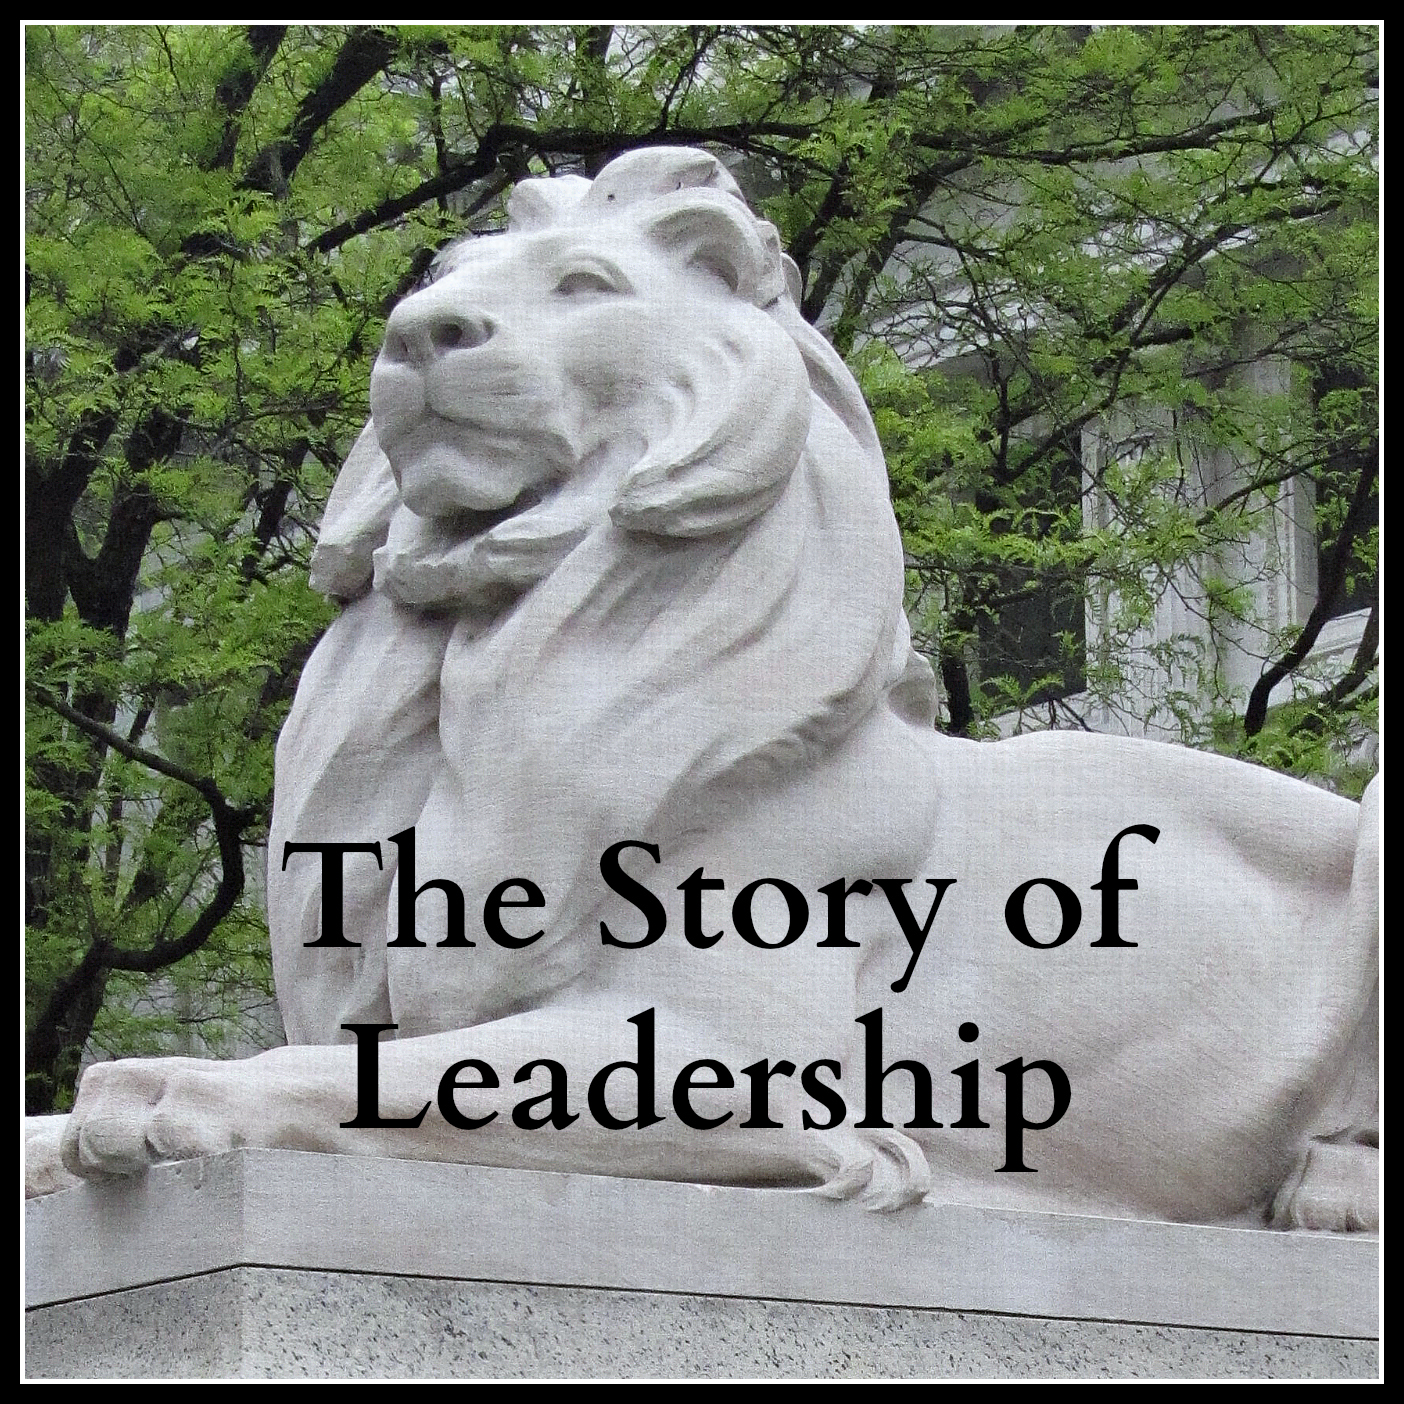 the story of leadership by Zette Harbour